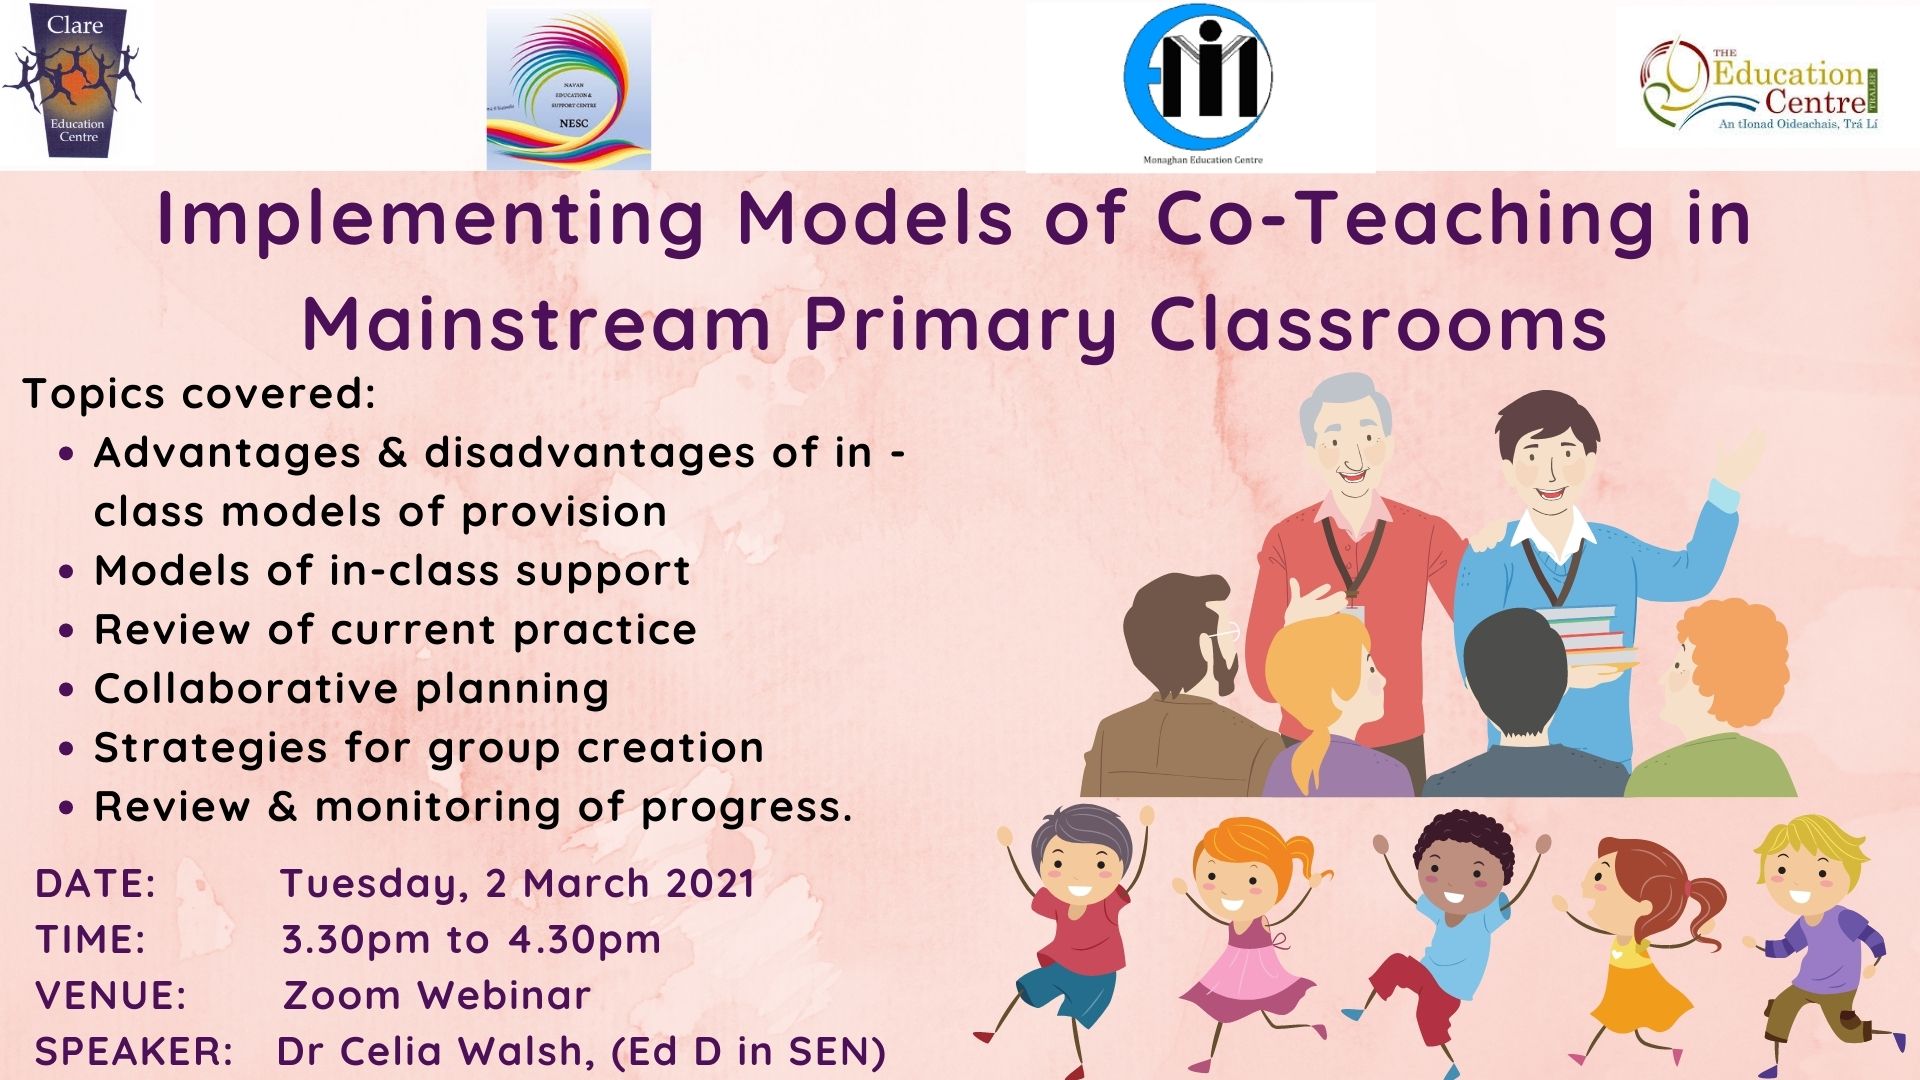 Mar 2 Implementing Models of Co Teaching in Mainstream Primary Classrooms